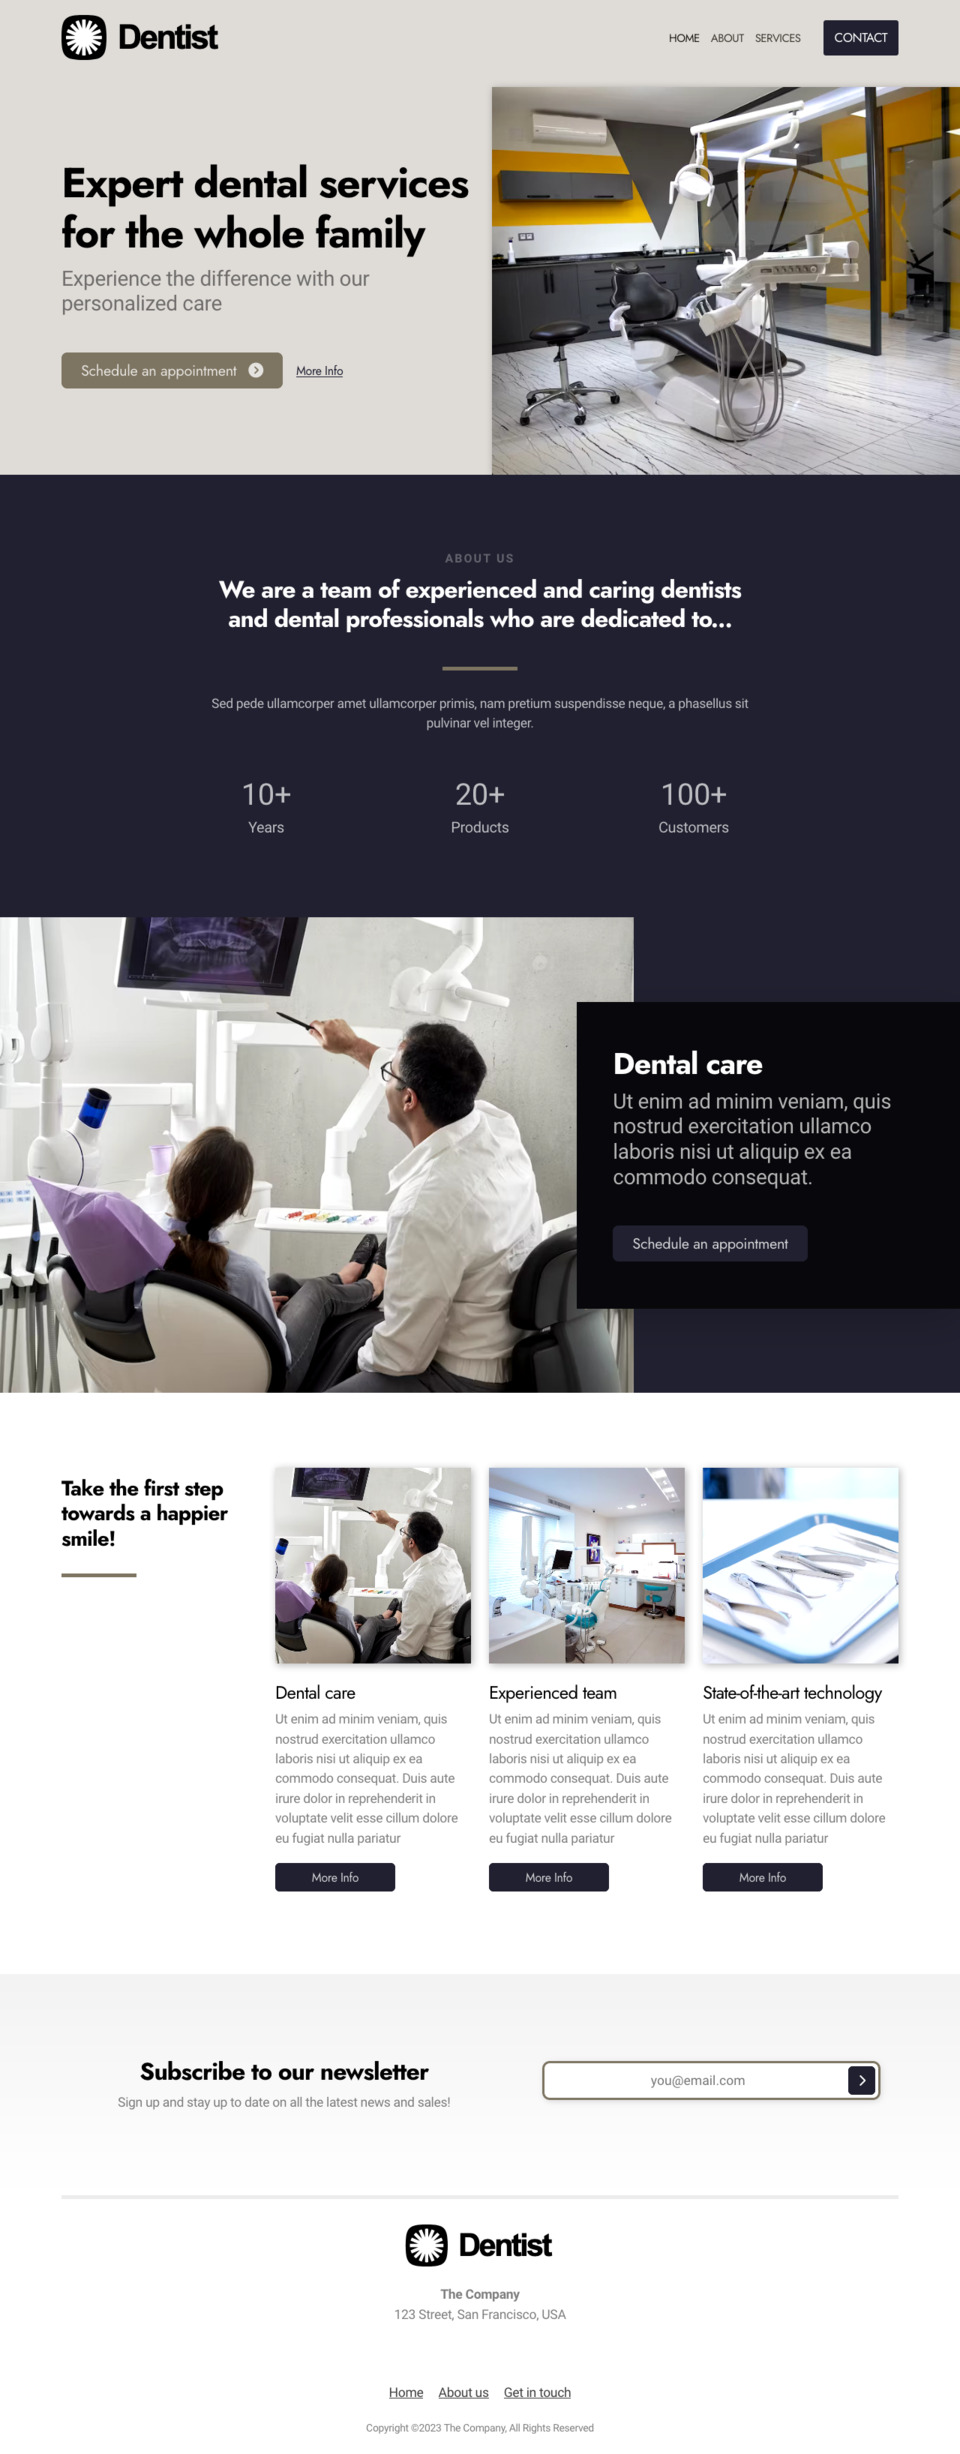 Dentist Website Template - Ideal for dentists, orthodontists, dental clinics, oral health professionals